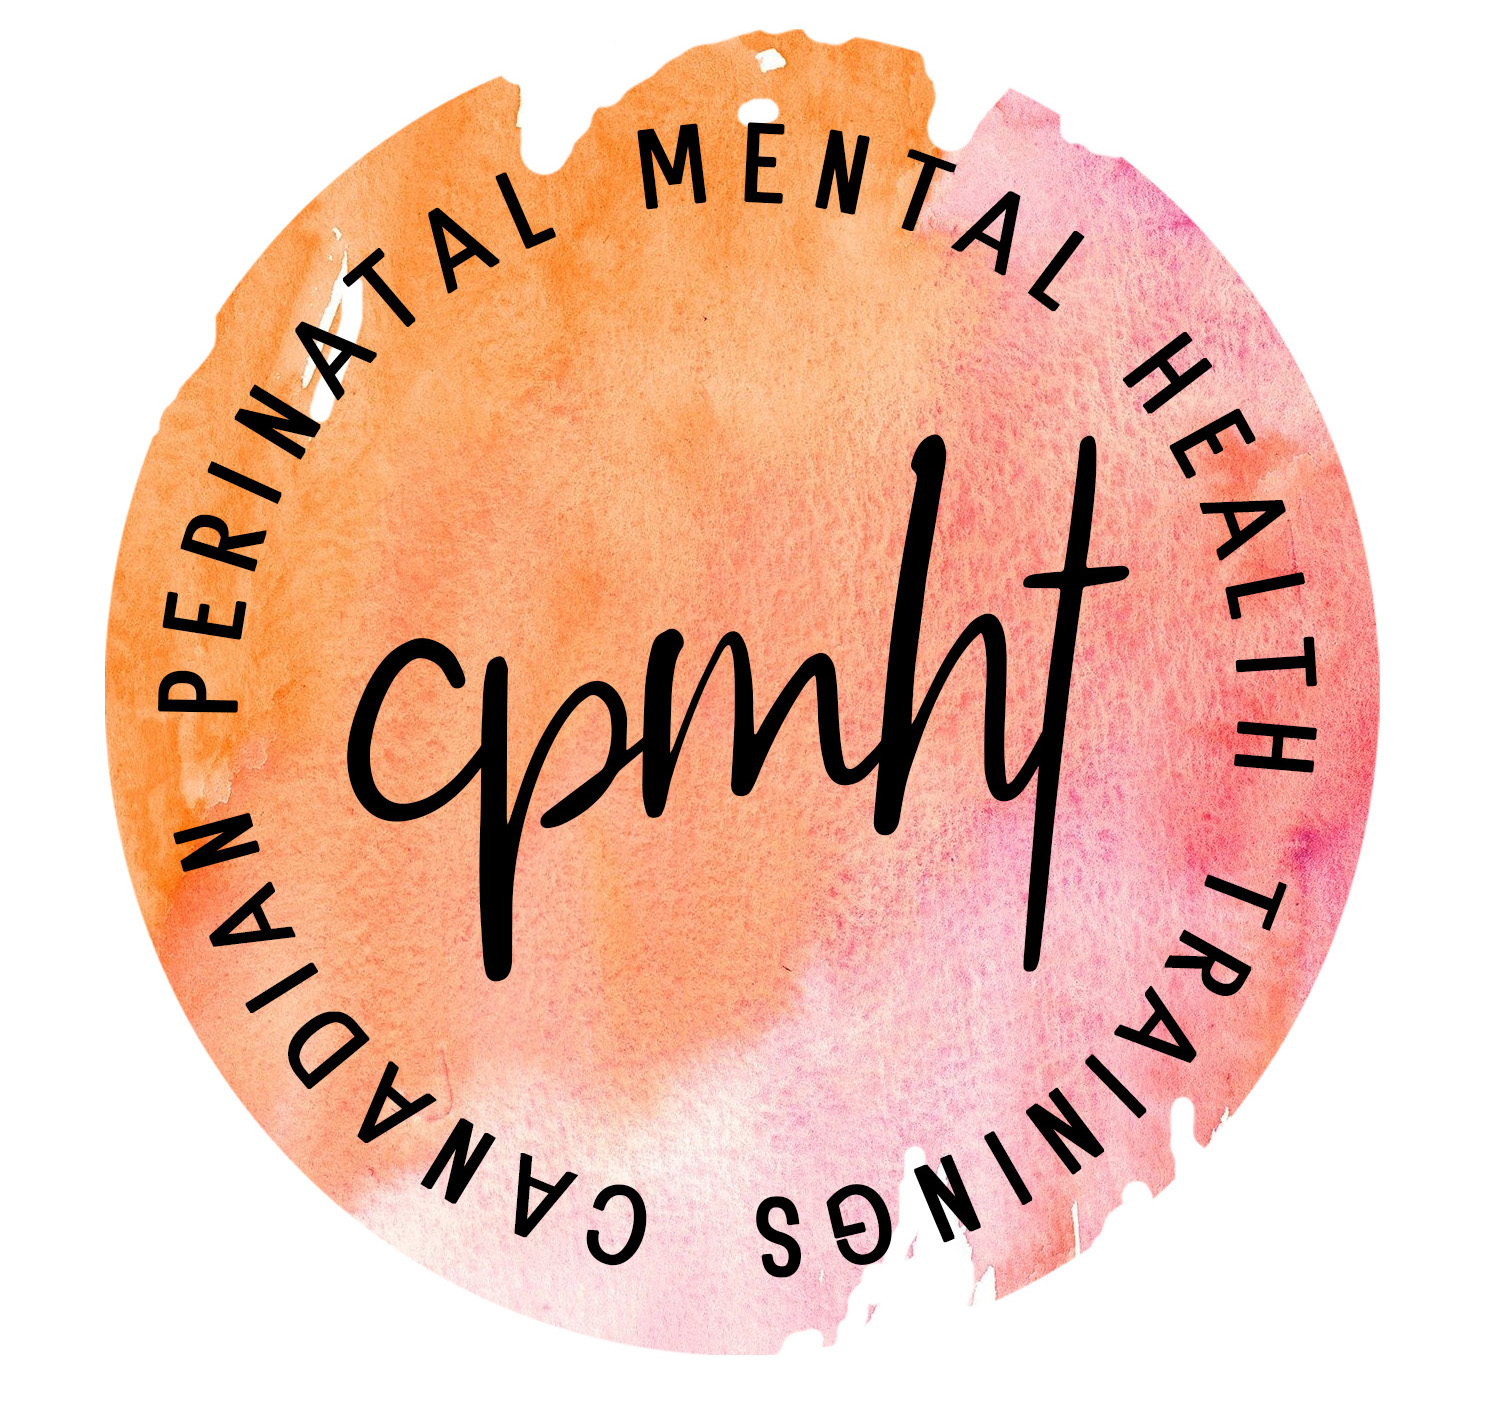 CPMHT logo. A grungey orange circle with Canadian Perinatal Mental Health Trainings around the edge of the circle. CPMHT is written in the middle.